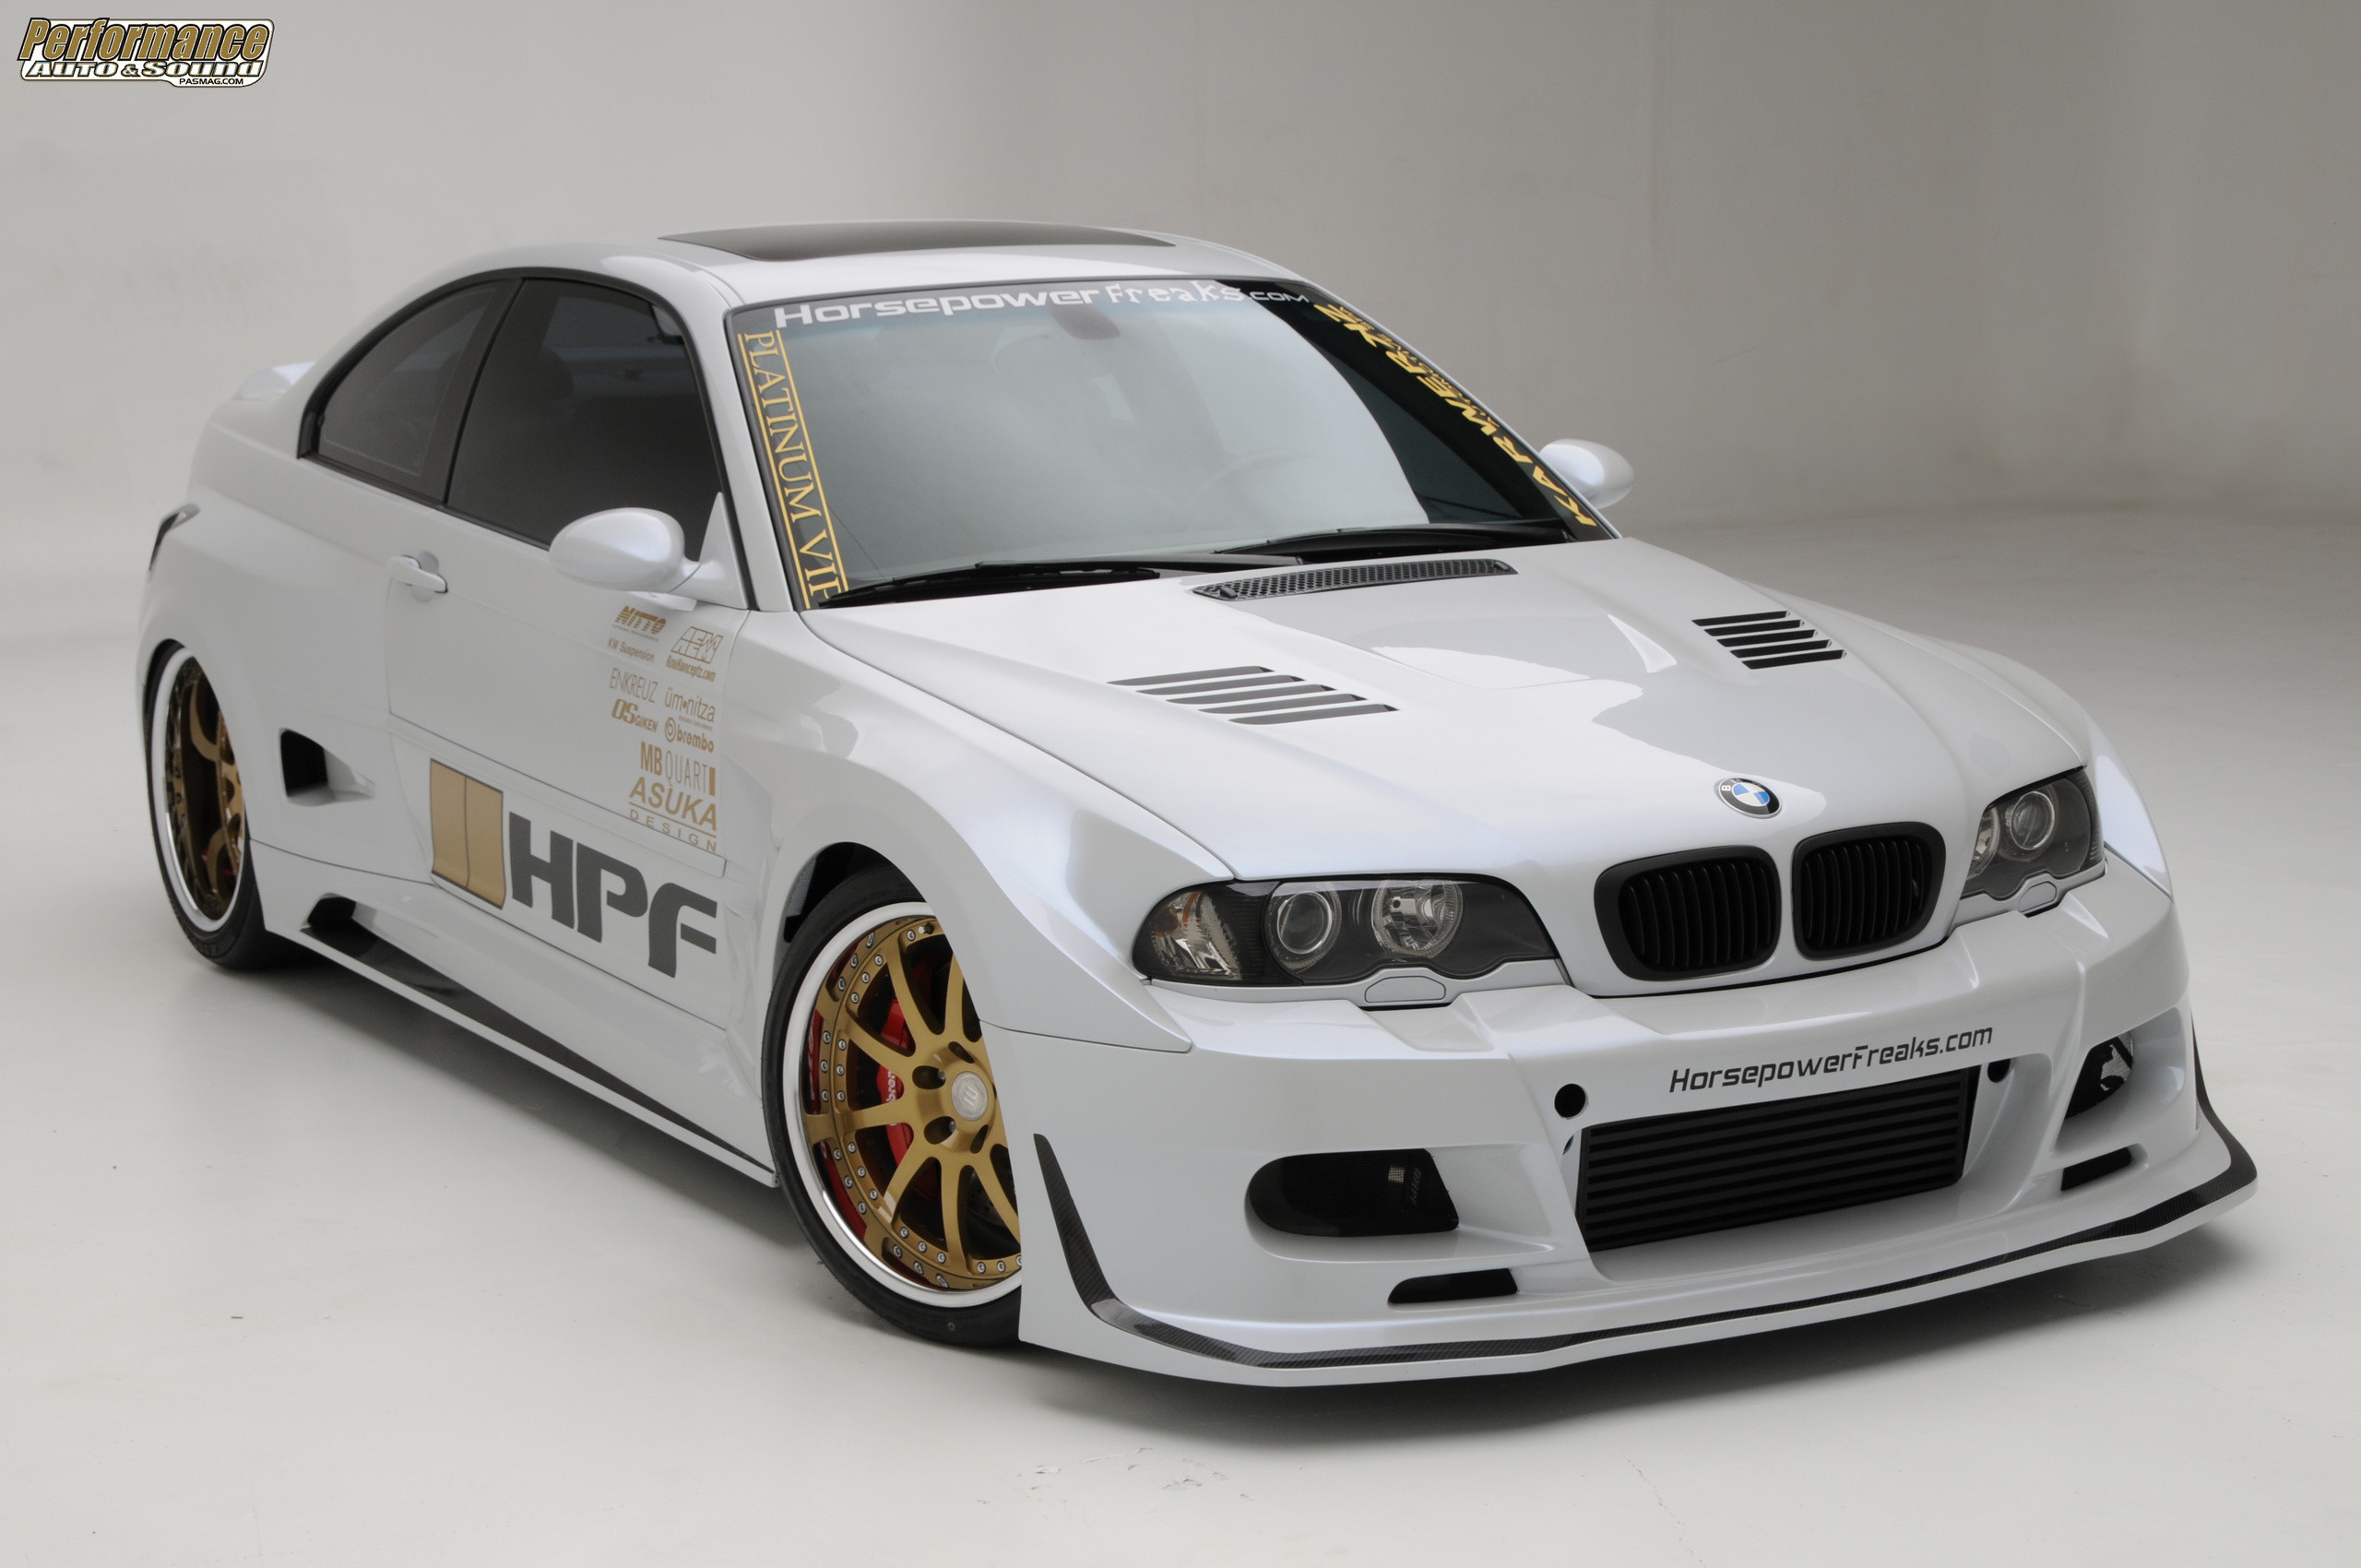 2560x1700 BMW images BMW E46 M3 TURBO BY HPF HD wallpaper and